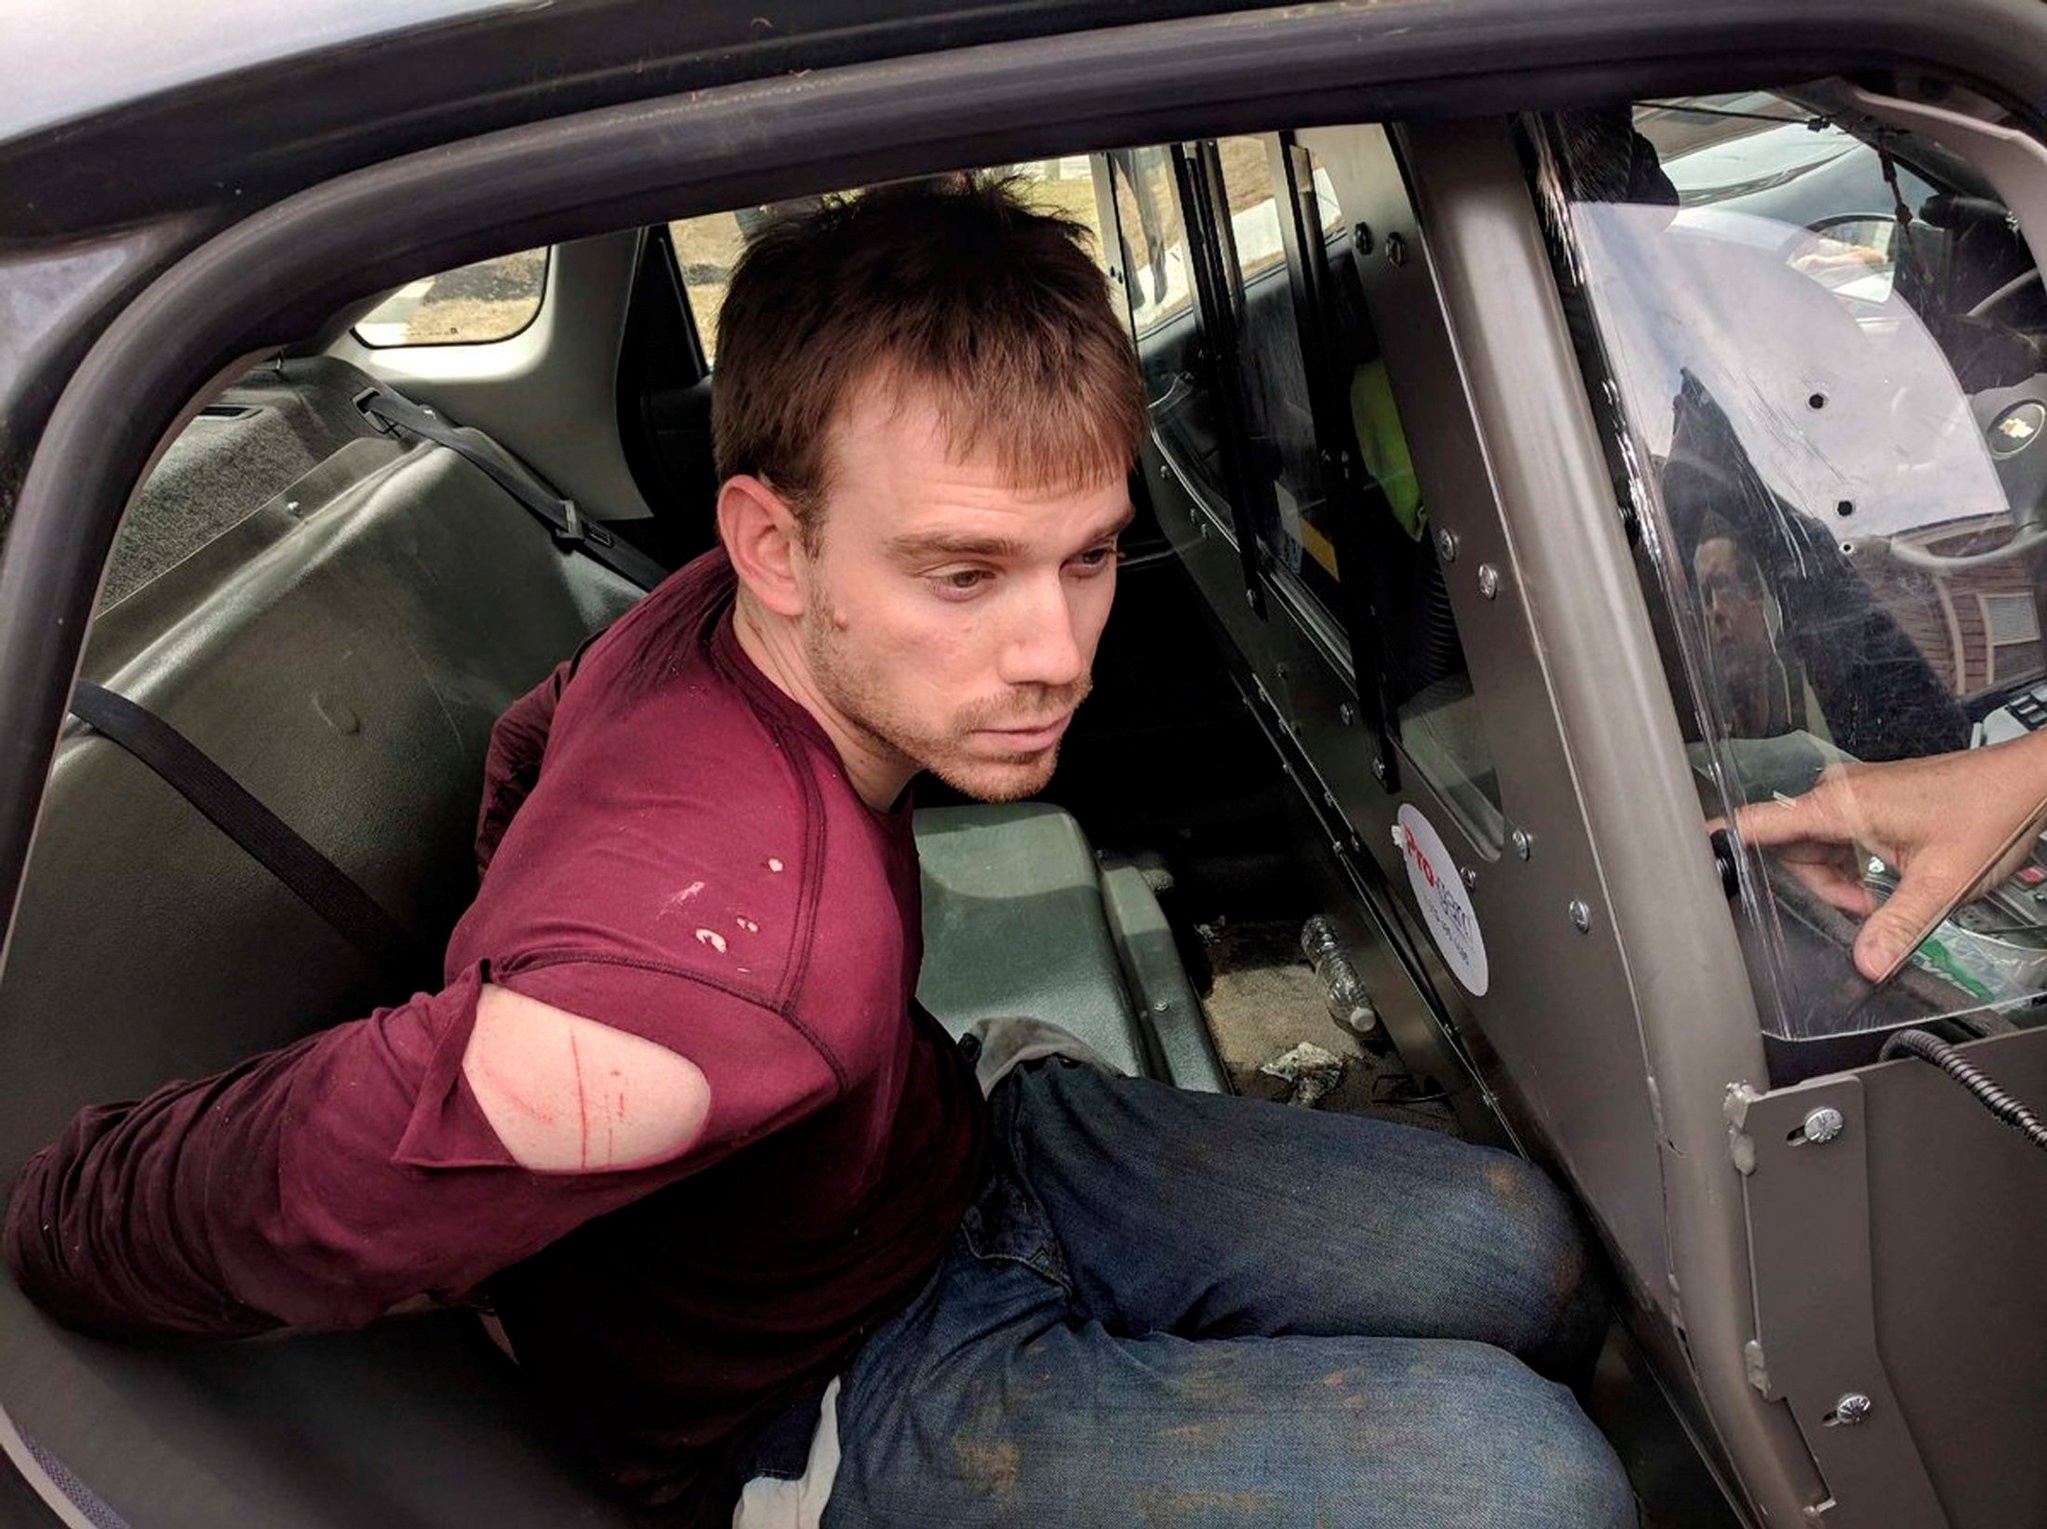 Travis Reinking, the suspect in a Waffle House shooting in Nashville, is under arrest by Metro Nashville Police Department in a wooded area in Antioch, Tennessee, U.S., April 23, 2018. (REUTERS Photo)